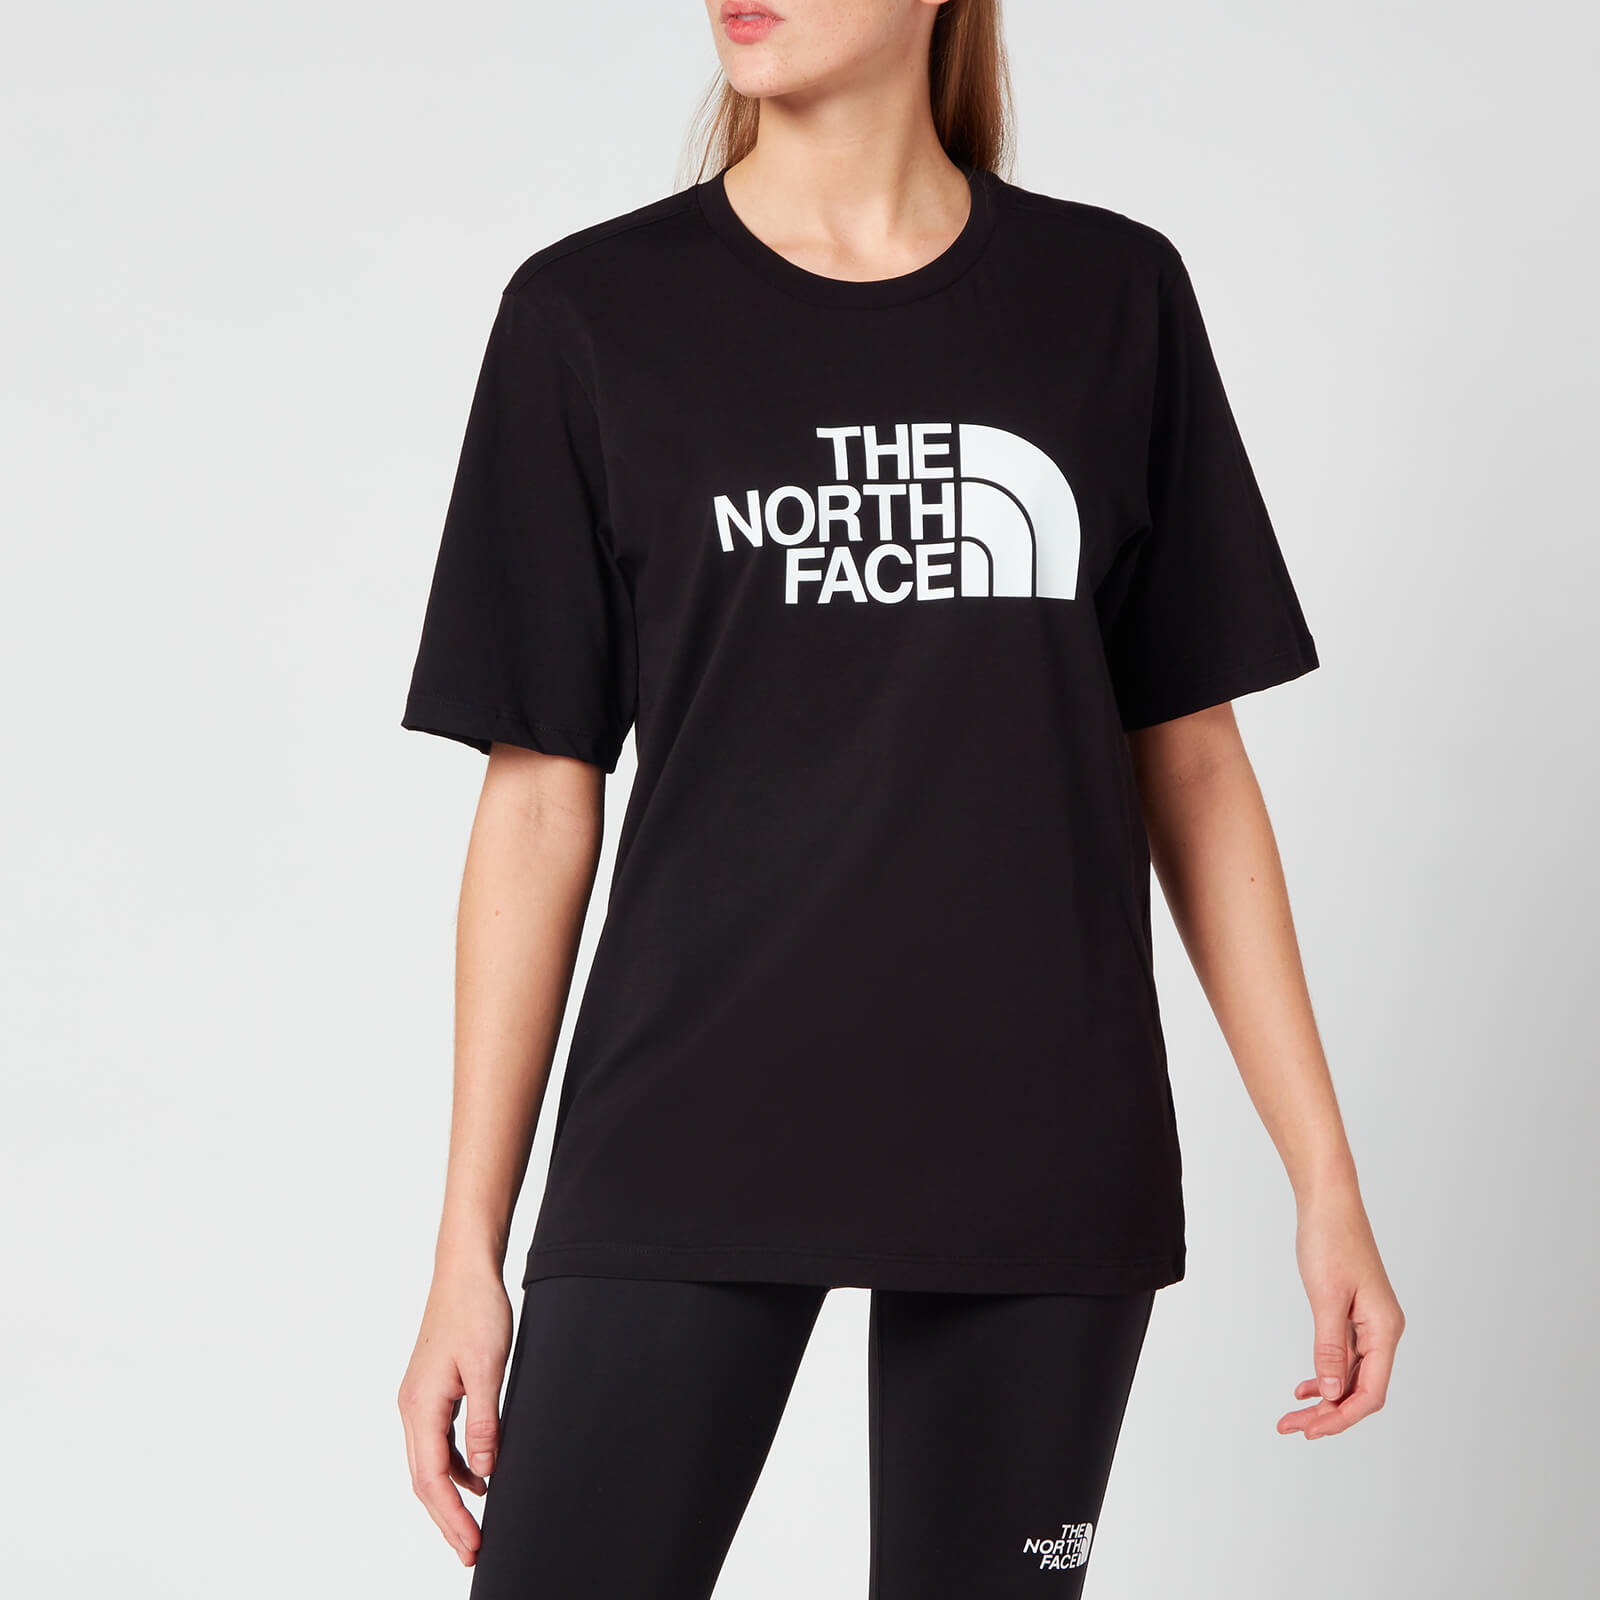 The North Face Women's Bf Easy T-Shirt - Black